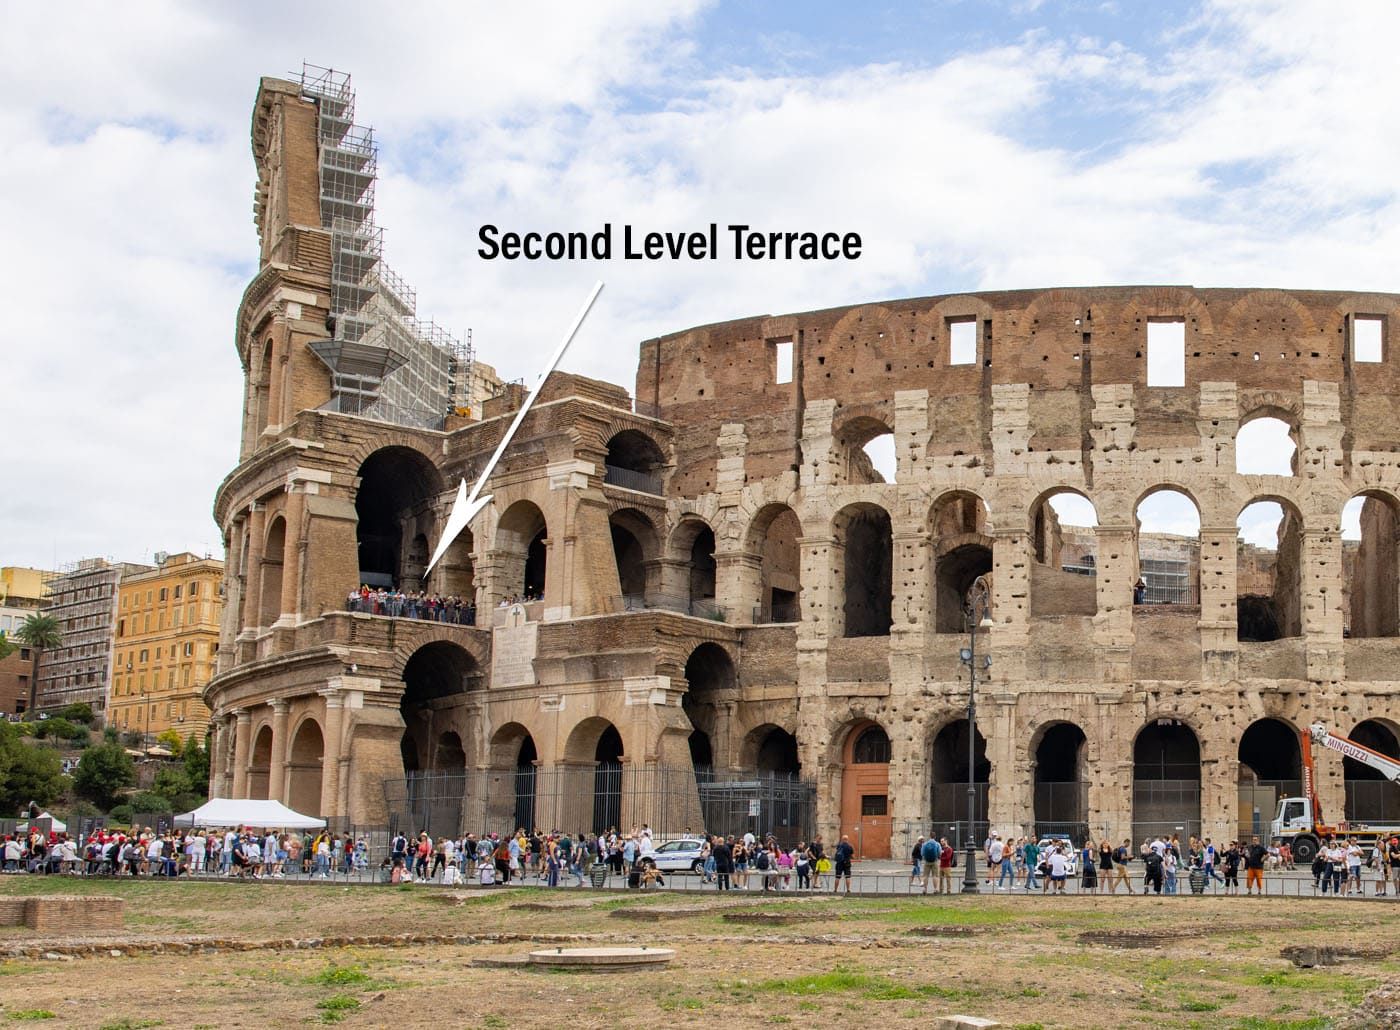 Second Level Terrace Colosseum | How to Visit the Colosseum